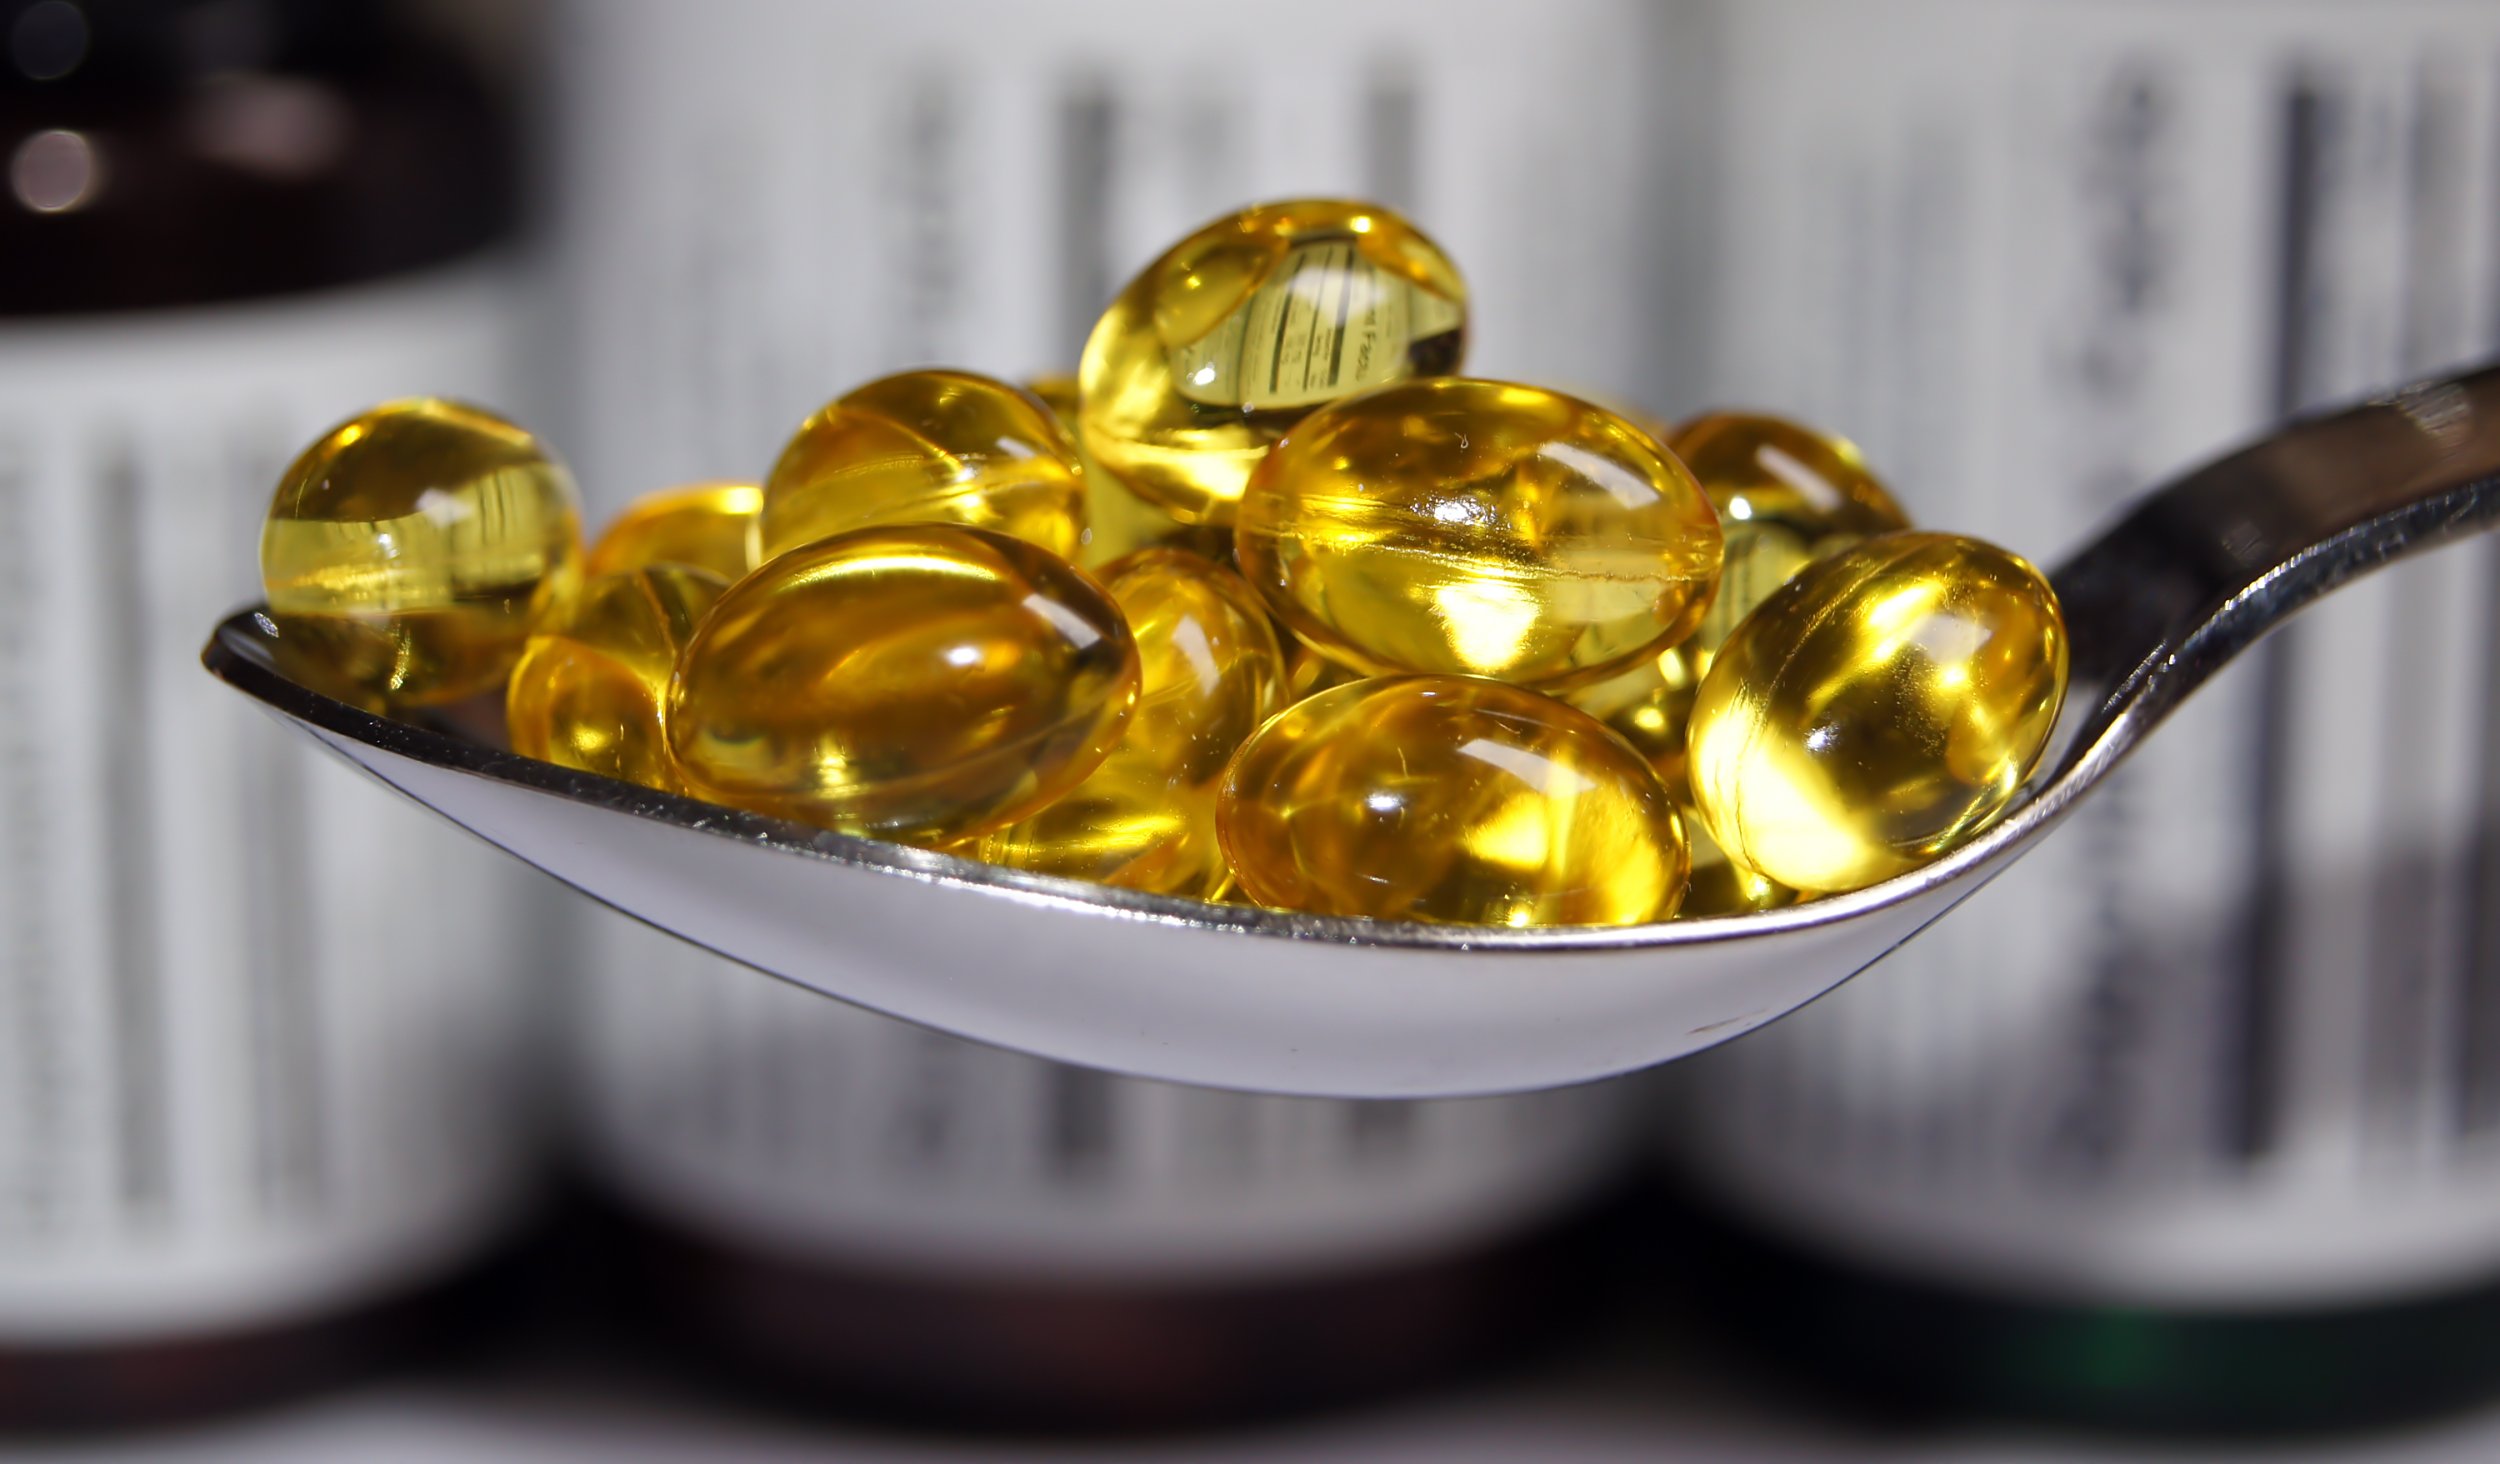 Global DHA Supplements Market Is Estimated To Witness High Growth Owing To Increasing Awareness About the Importance